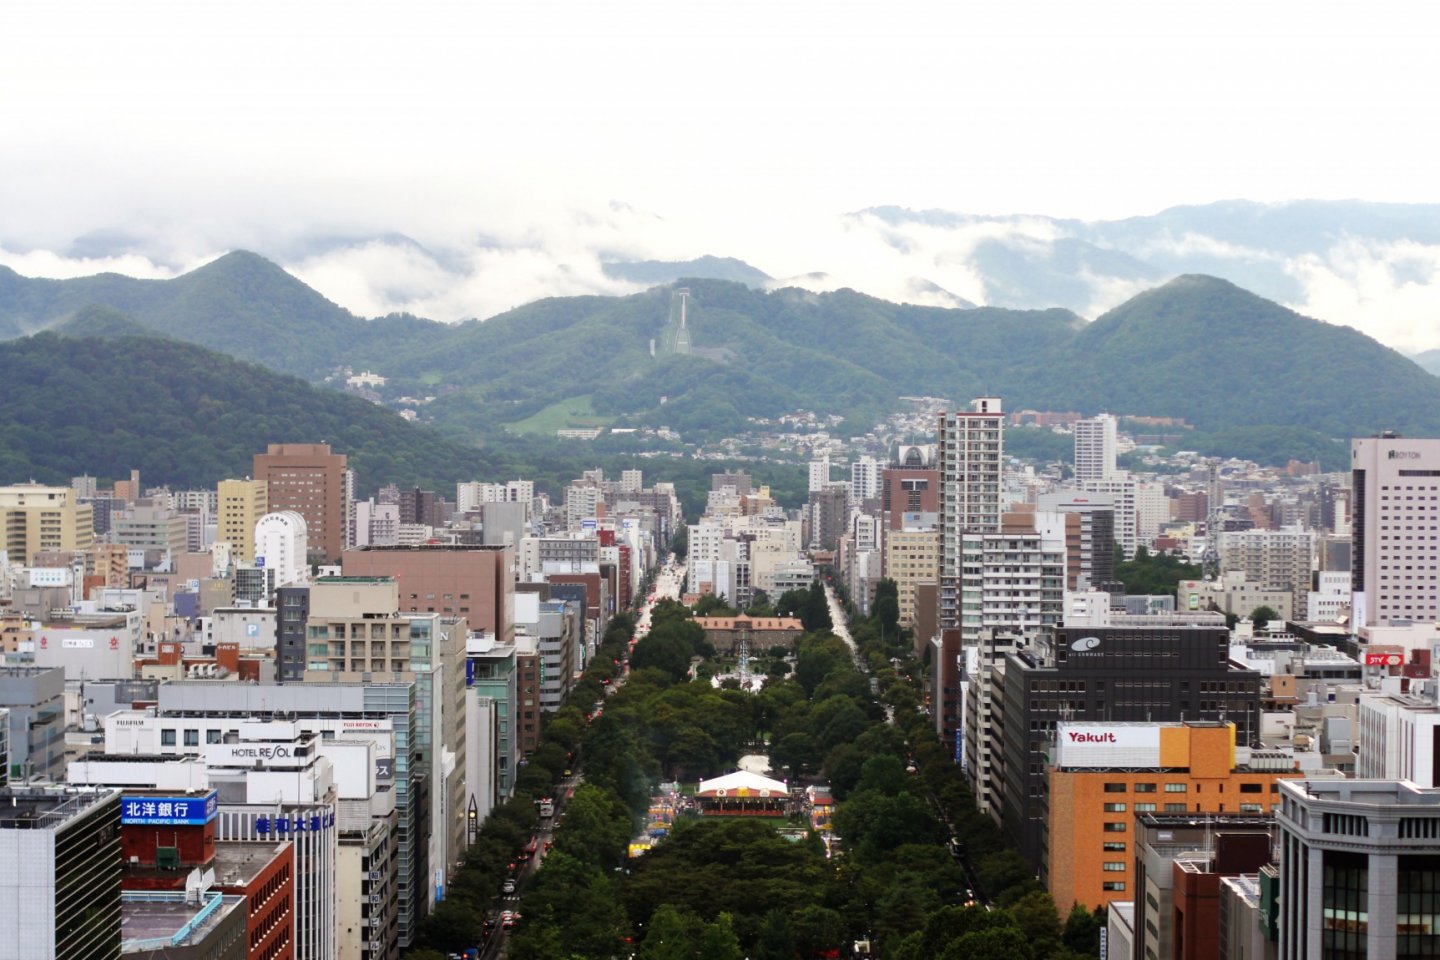 The huge Odori Park, cityscape and mountain in one frame picture are great.